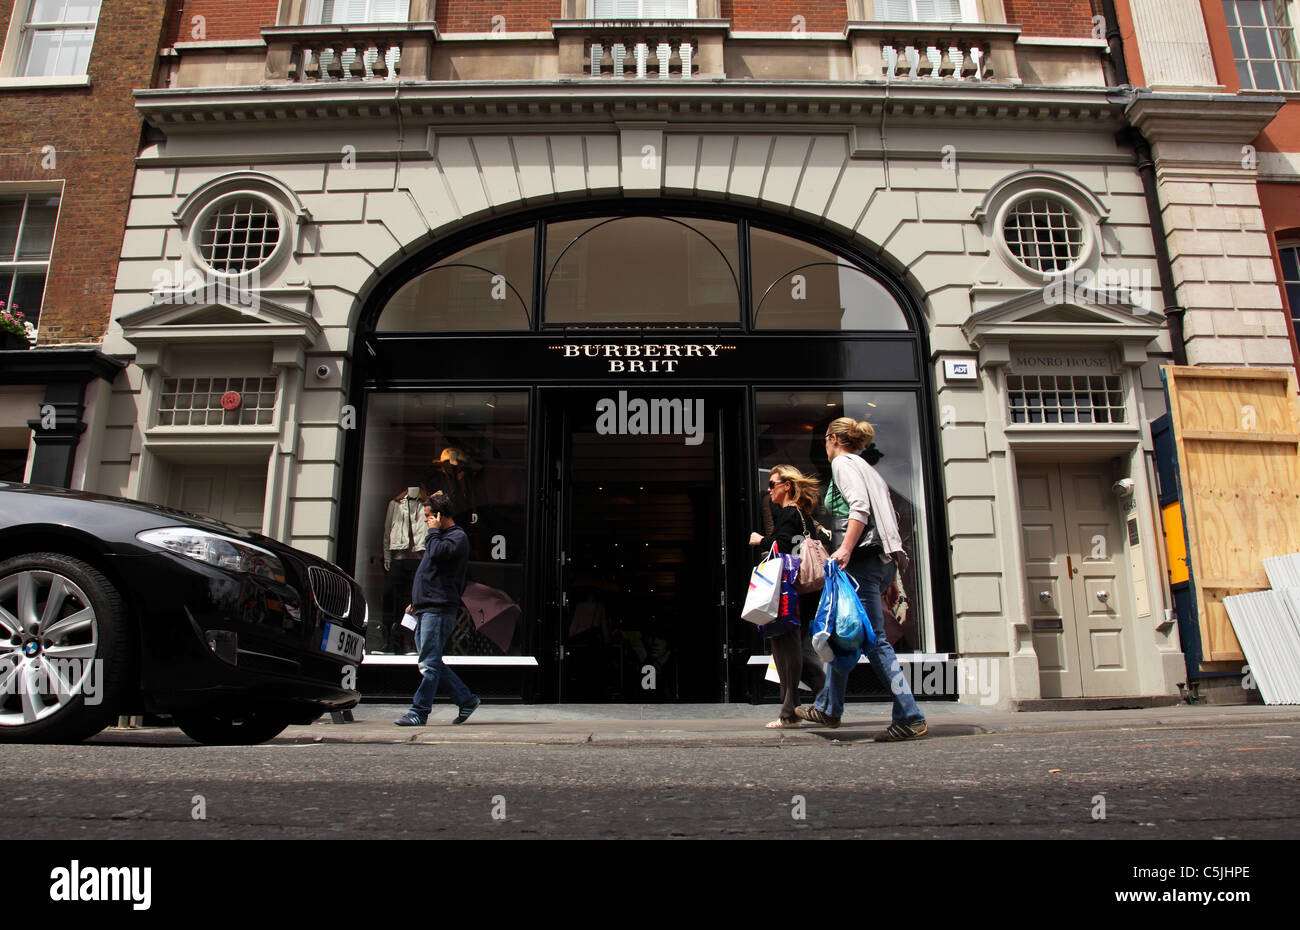 A Burberry Brit store in New Row, Covent Garden, London WC2, England, U.K. Stock Photo